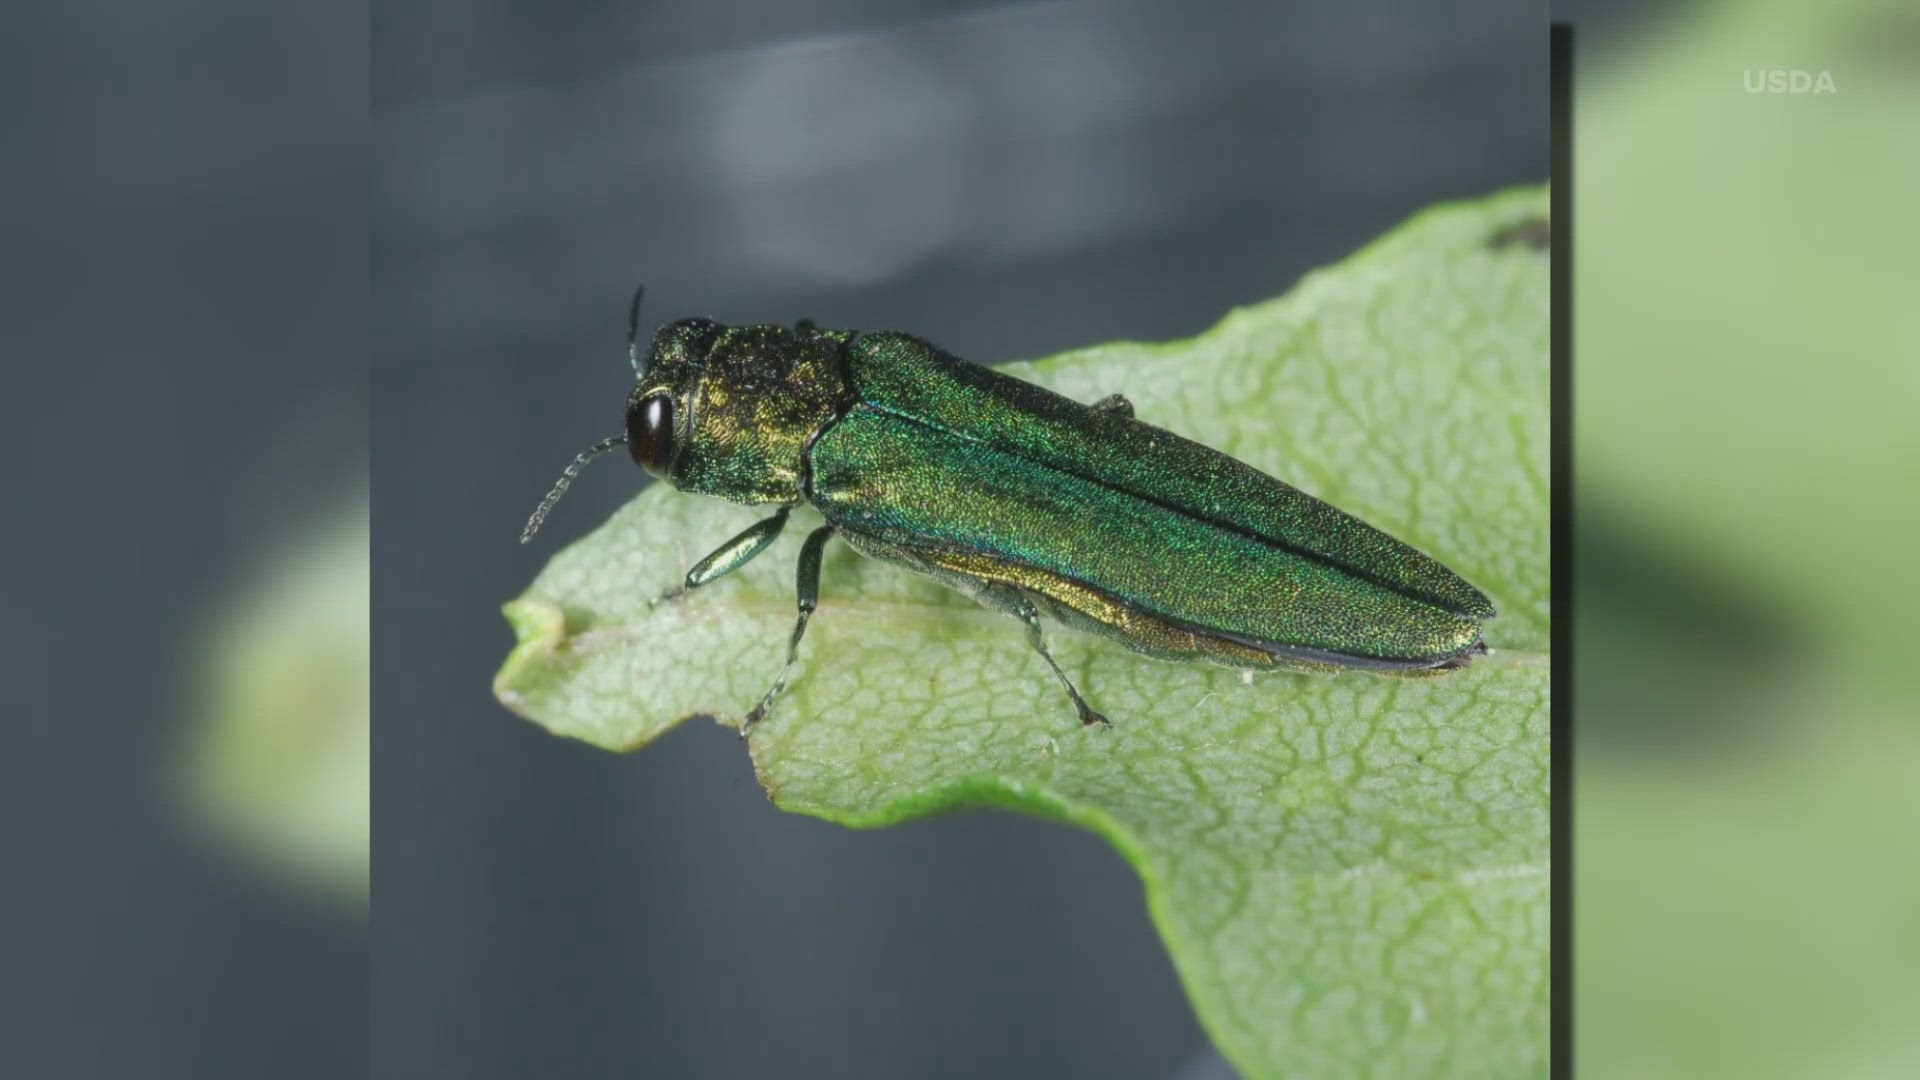 The emerald ash borer is considered to be one of the most invasive pests in the country. Experts believe human activity brought it to Central Texas.